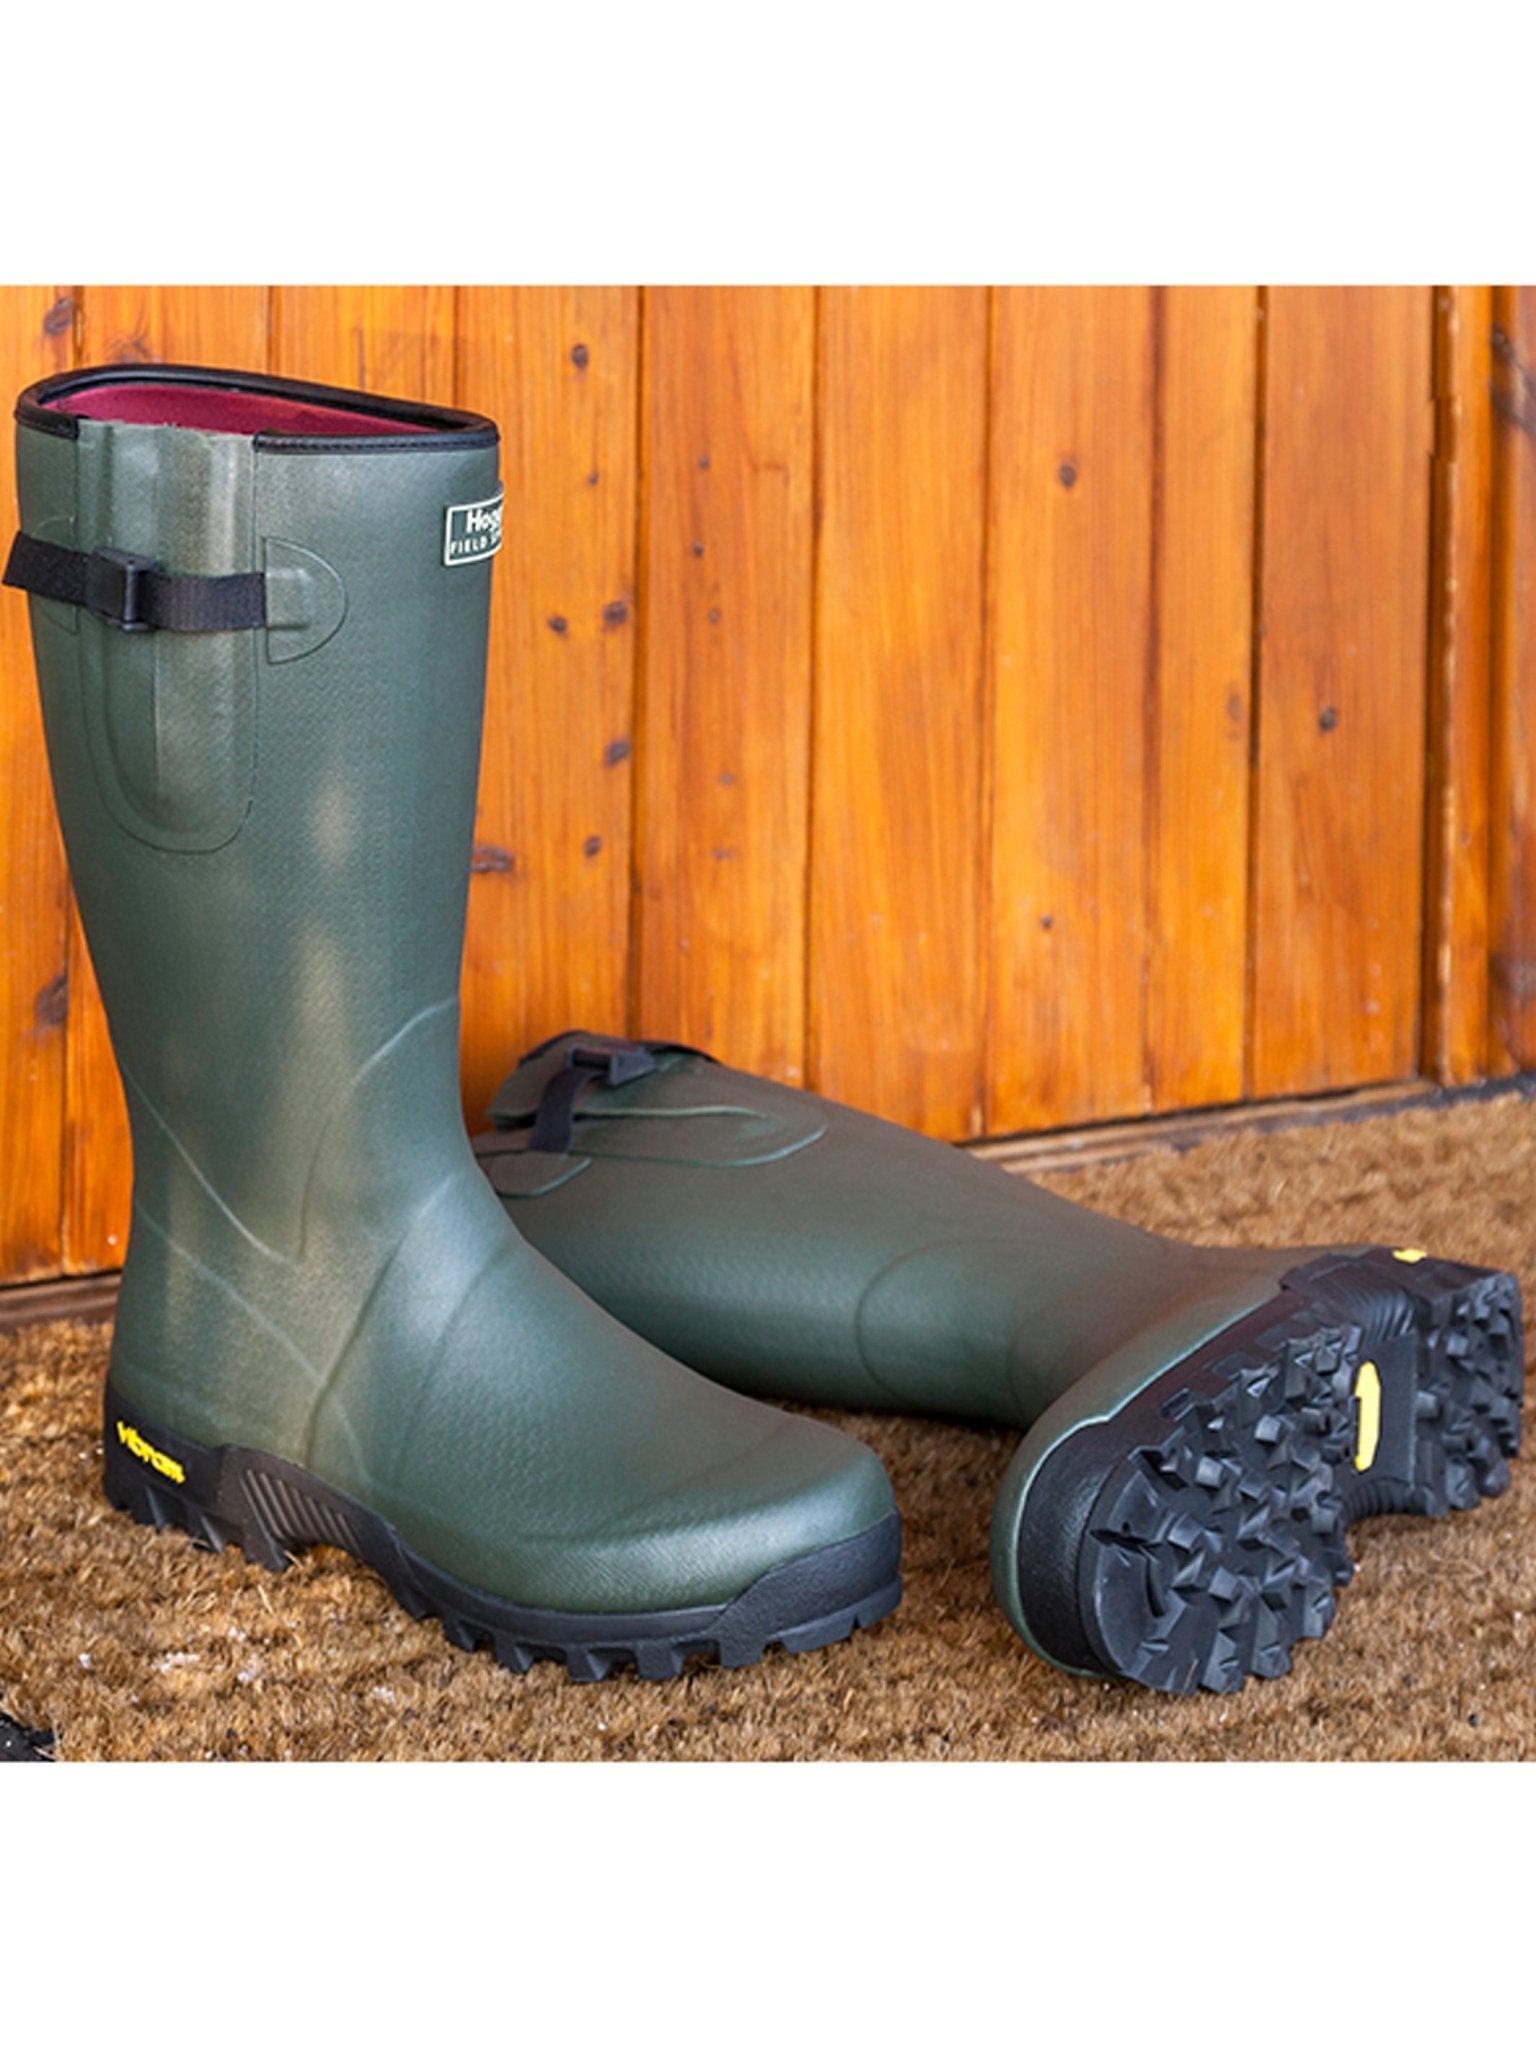 Hoggs of Fife Hoggs Of Fife - Wellington boots Neoprene - lined / welly boot - Rubber boot Field Sports Wellington Boots